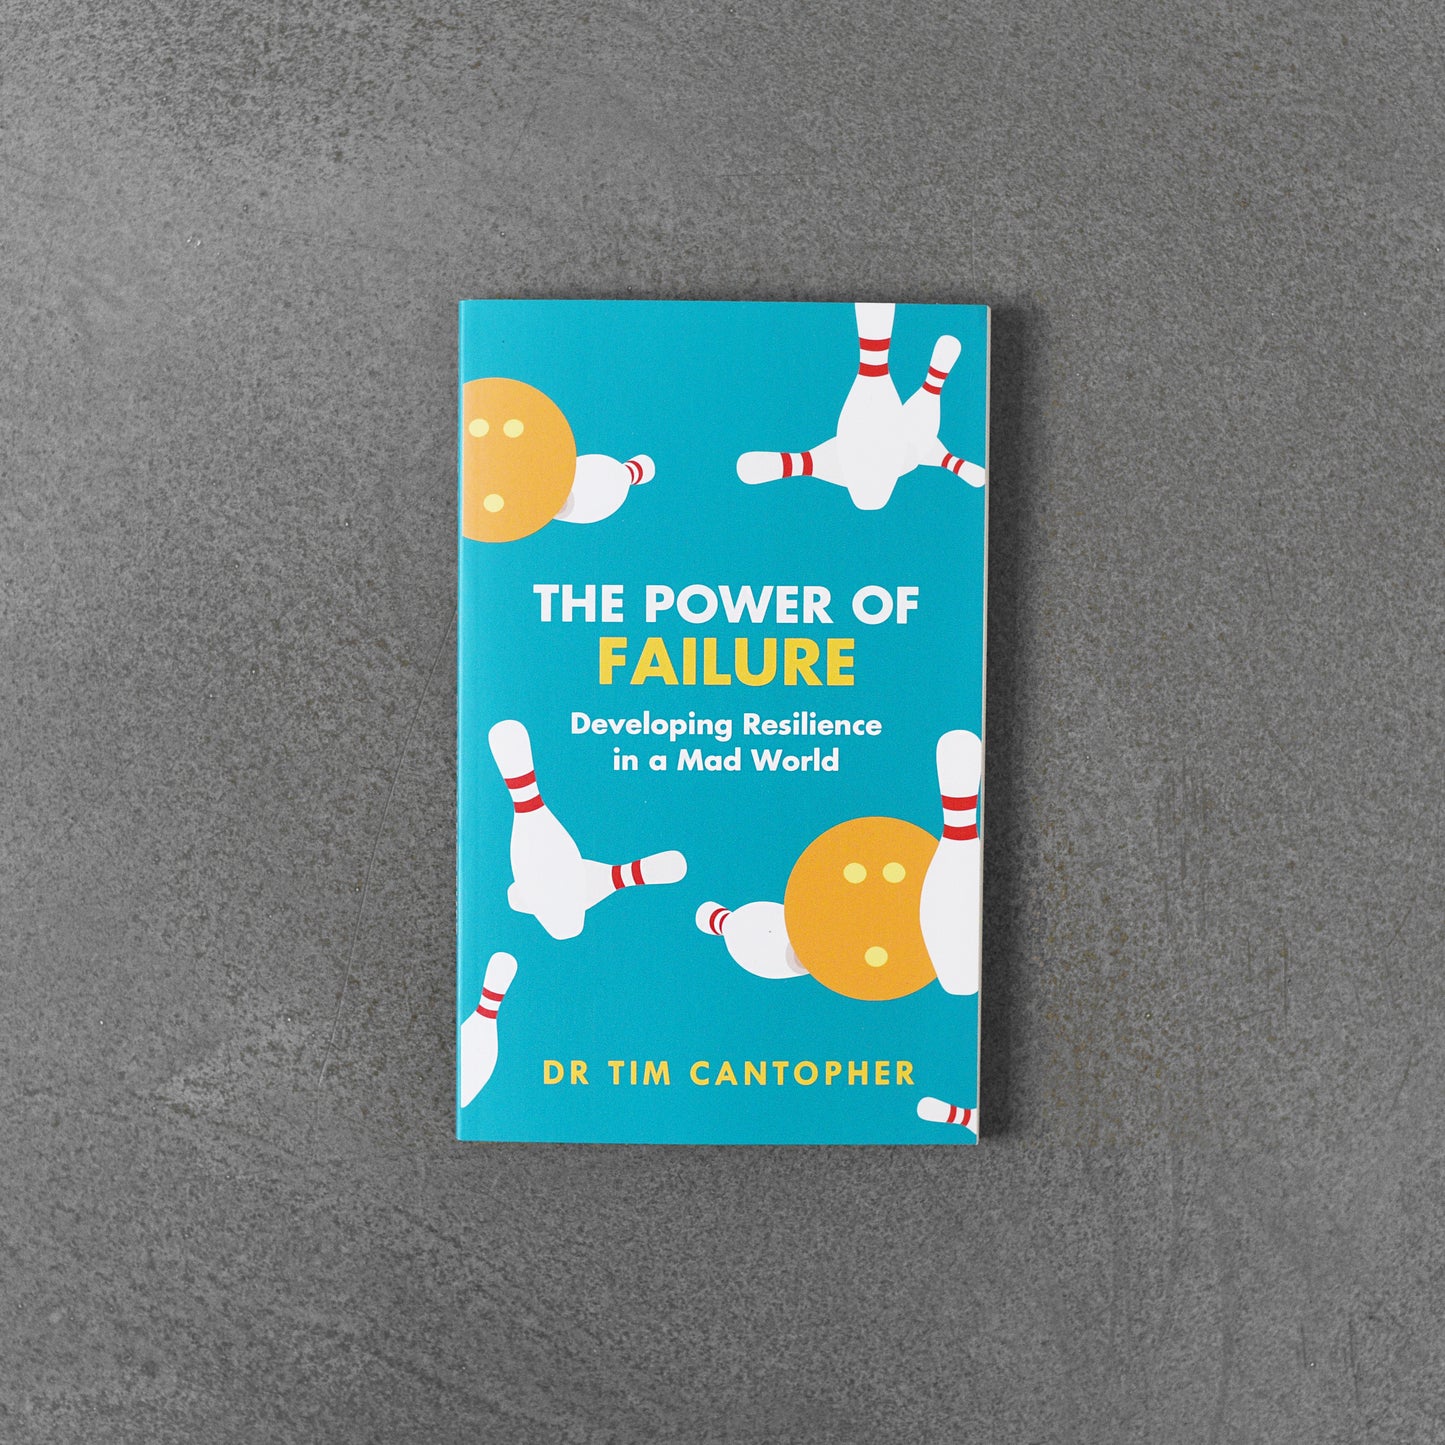 The Power of Failure: Developing Resilience in a Mad World - Dr Tim Cantopher